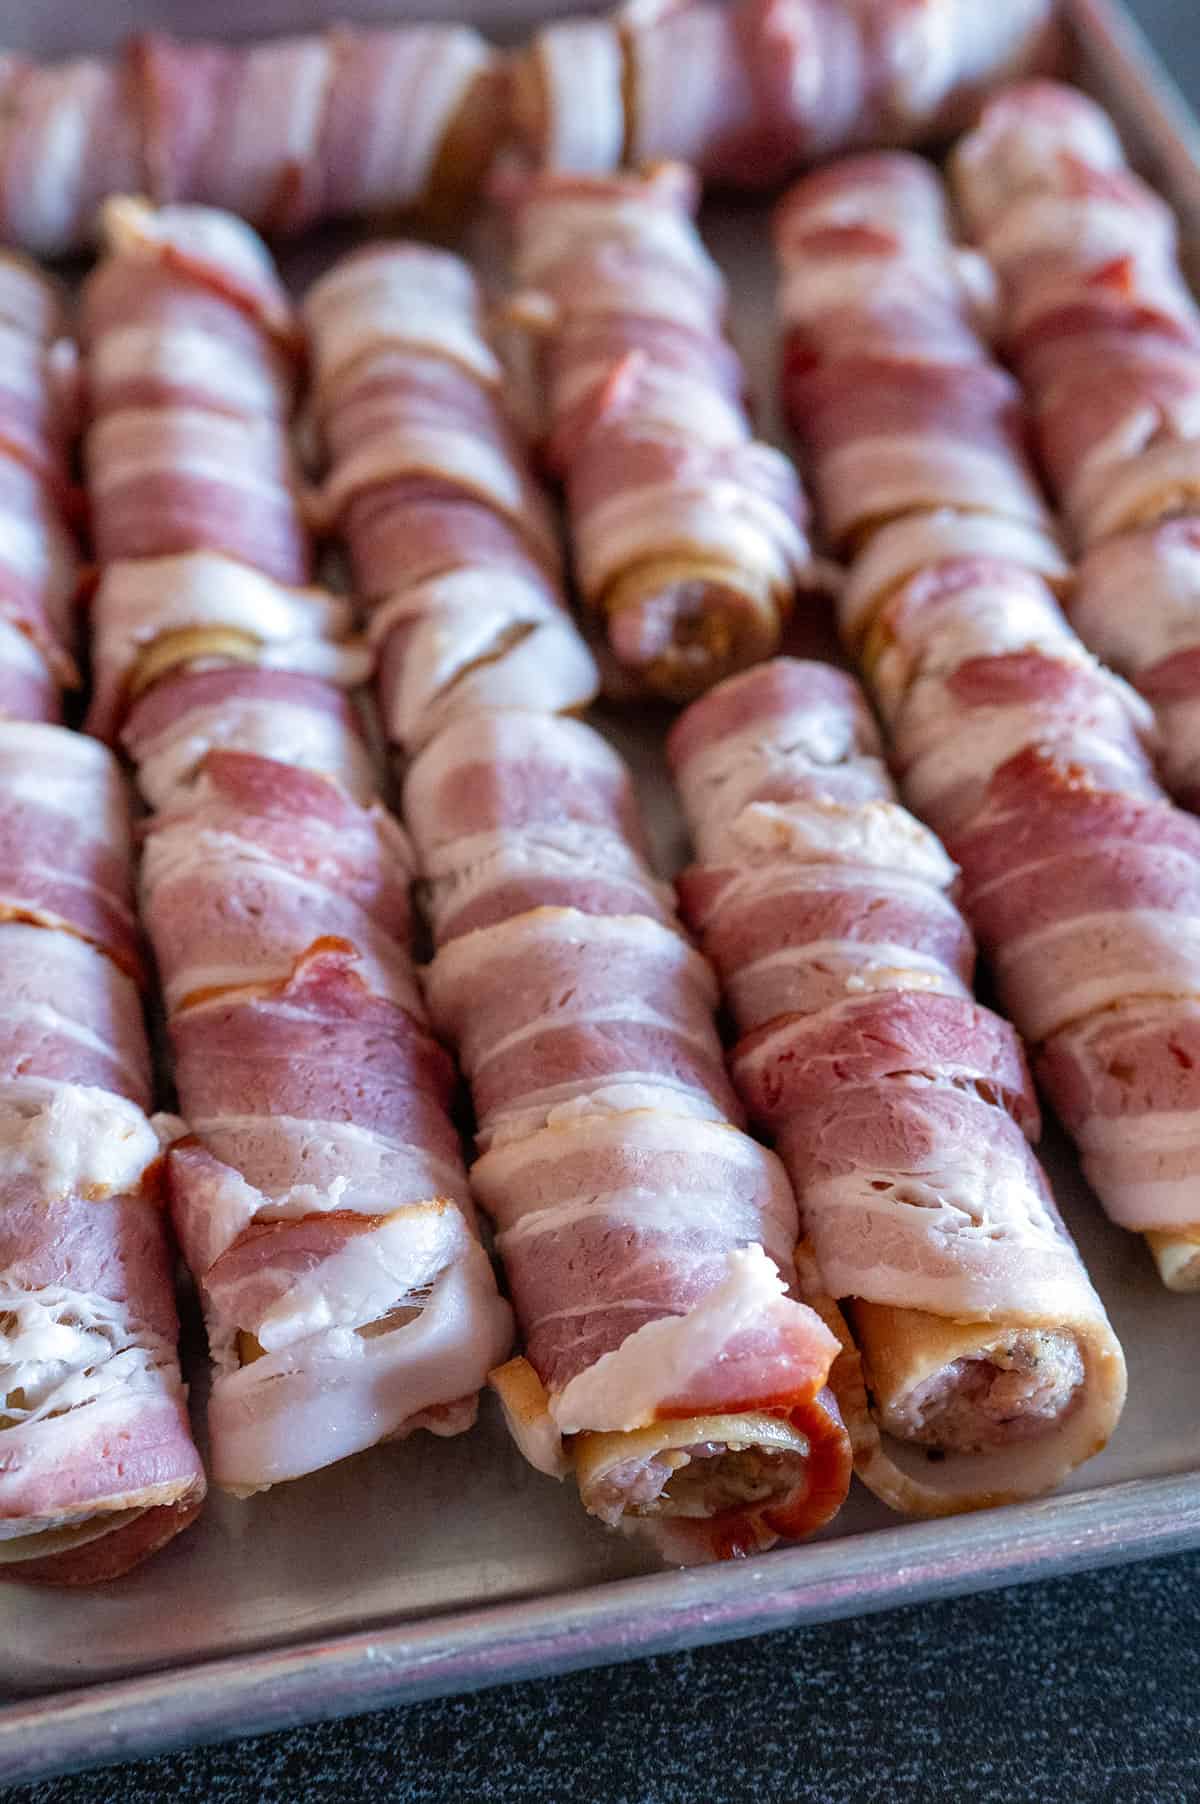 Manicotti wrapped in bacon.